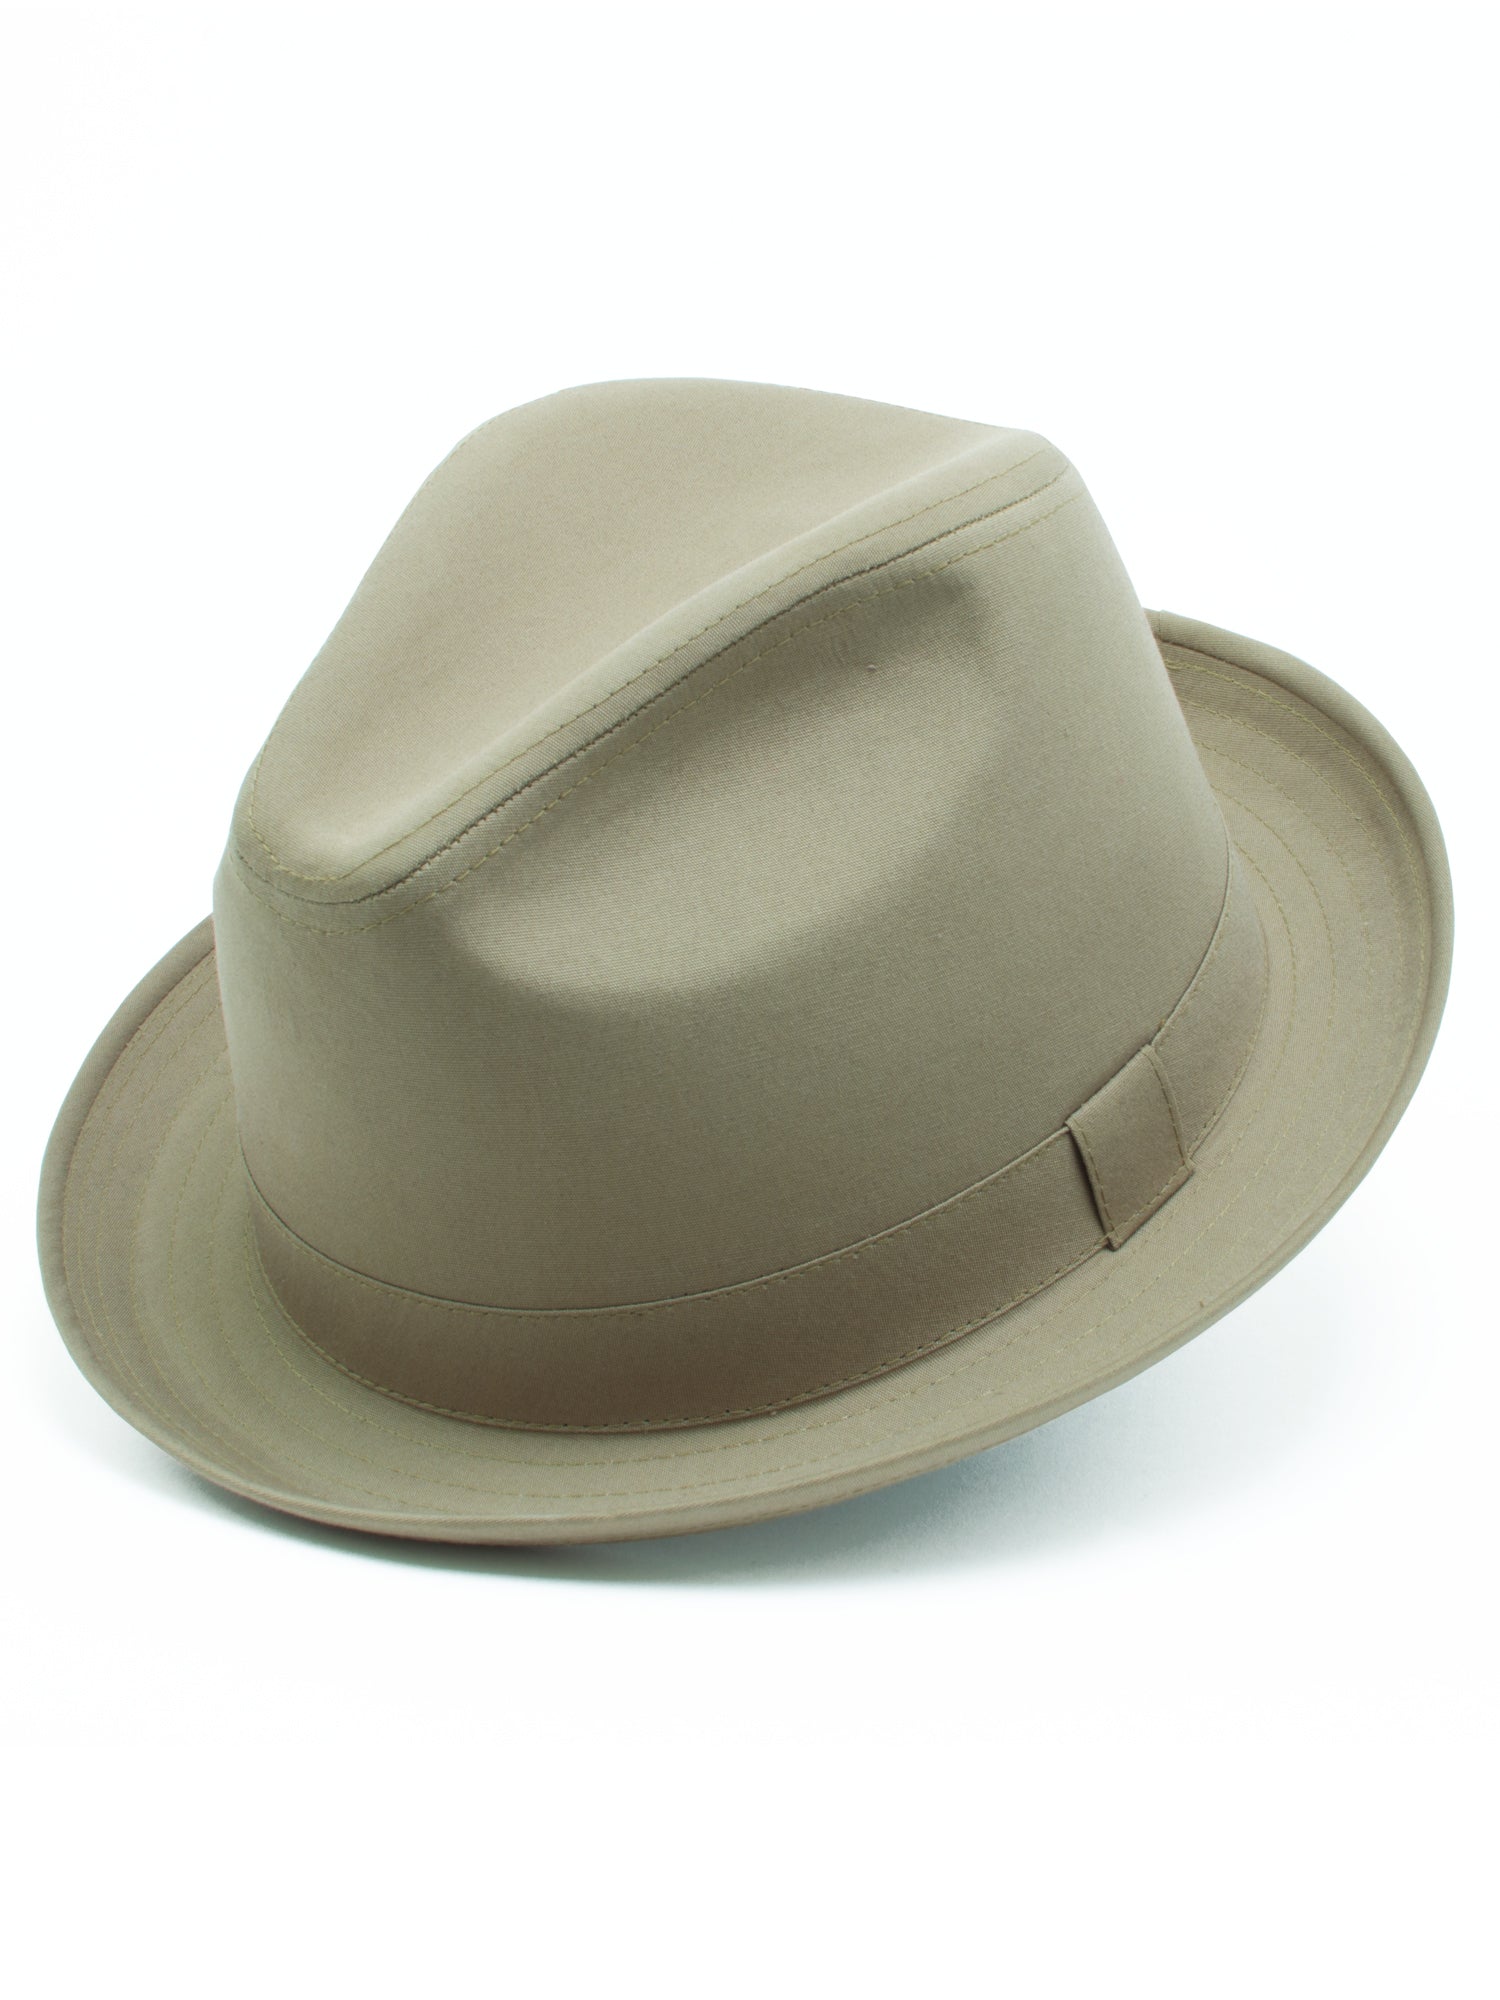 Dobb's Cotton Blend Andes Hats in TAN